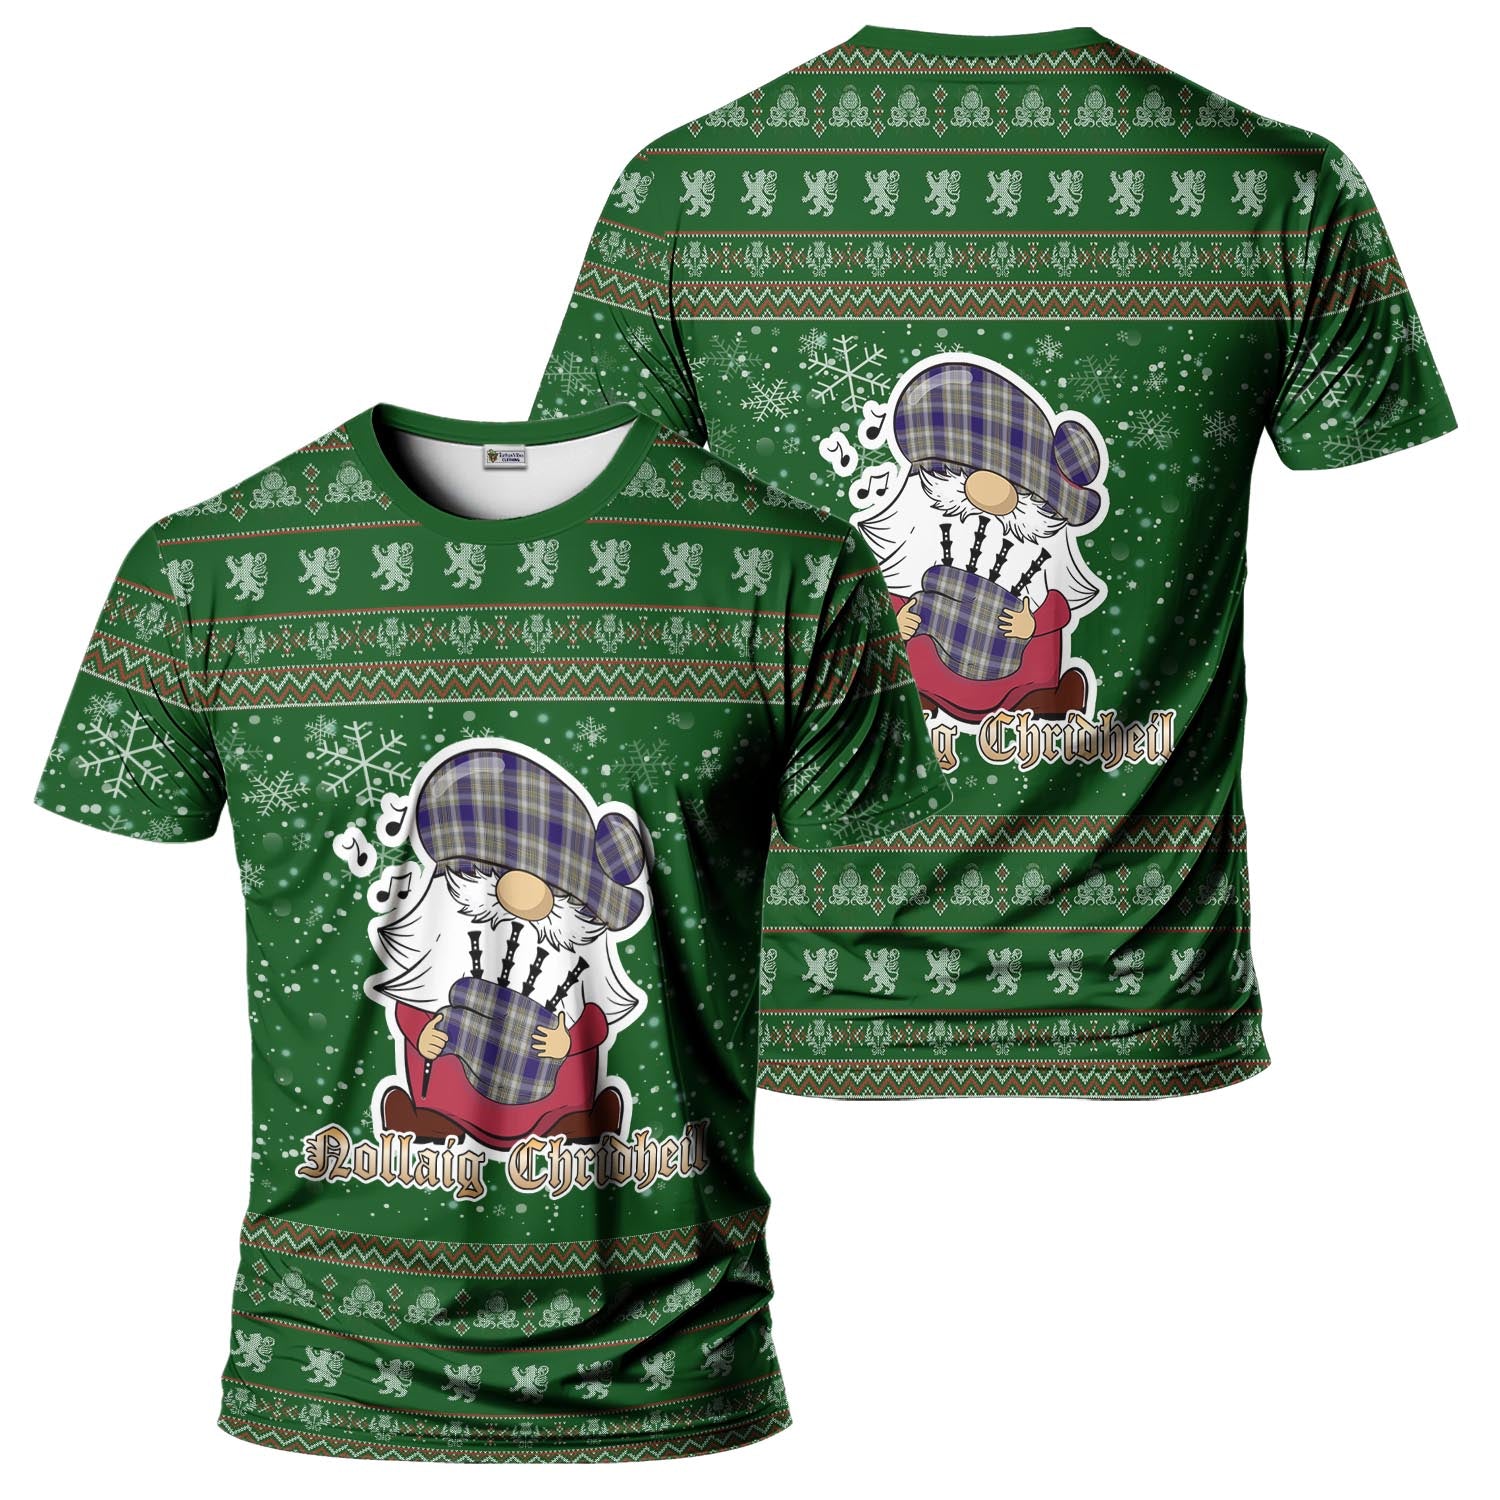 Livingston Dress Clan Christmas Family T-Shirt with Funny Gnome Playing Bagpipes Men's Shirt Green - Tartanvibesclothing